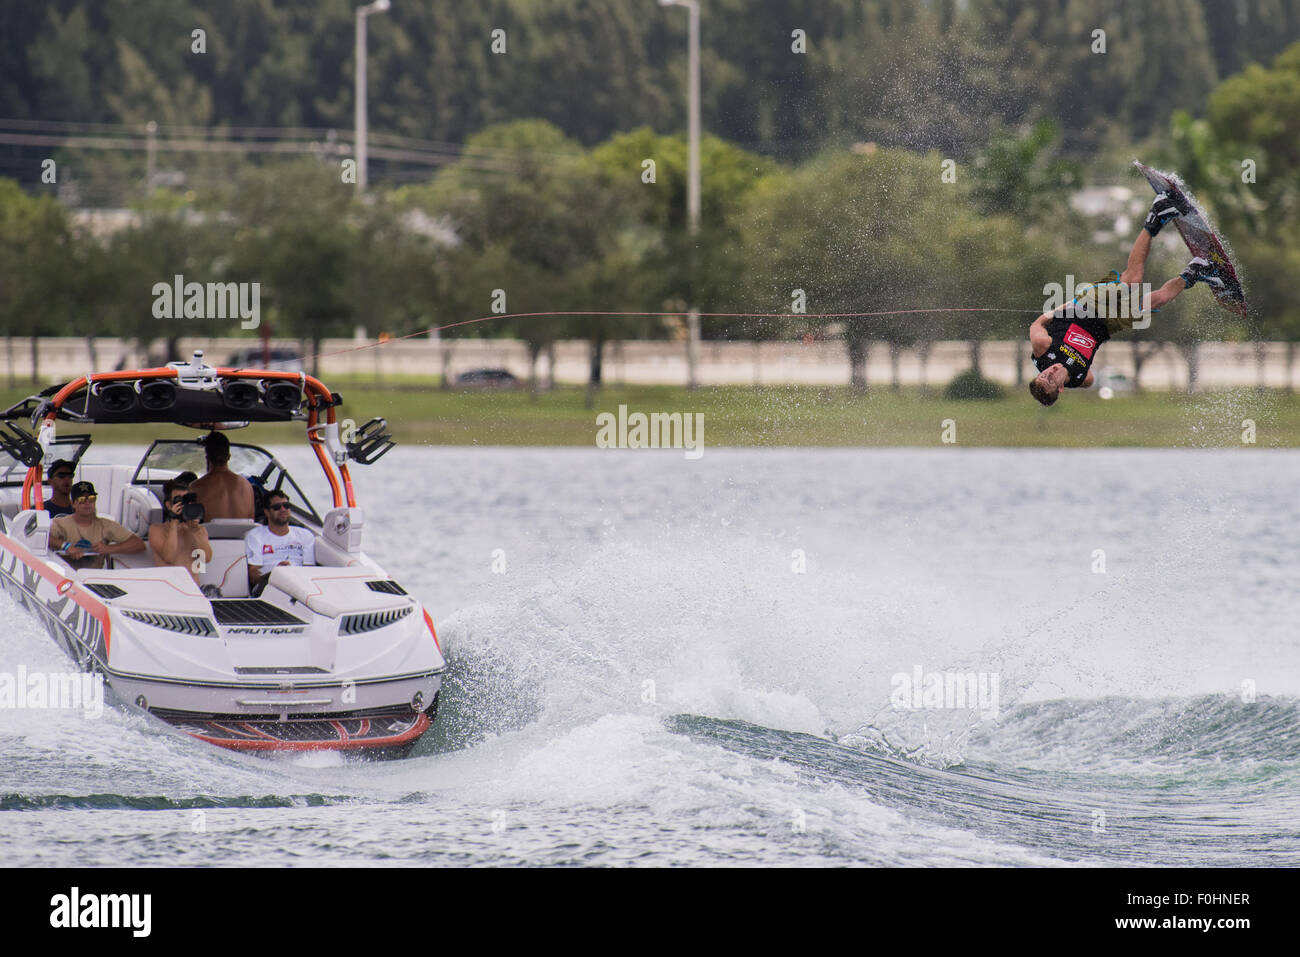 Wakeboarding National Championship at Miami Watersports Complex, Amelia Earhart Park, Hialeah, Florida. Stock Photo